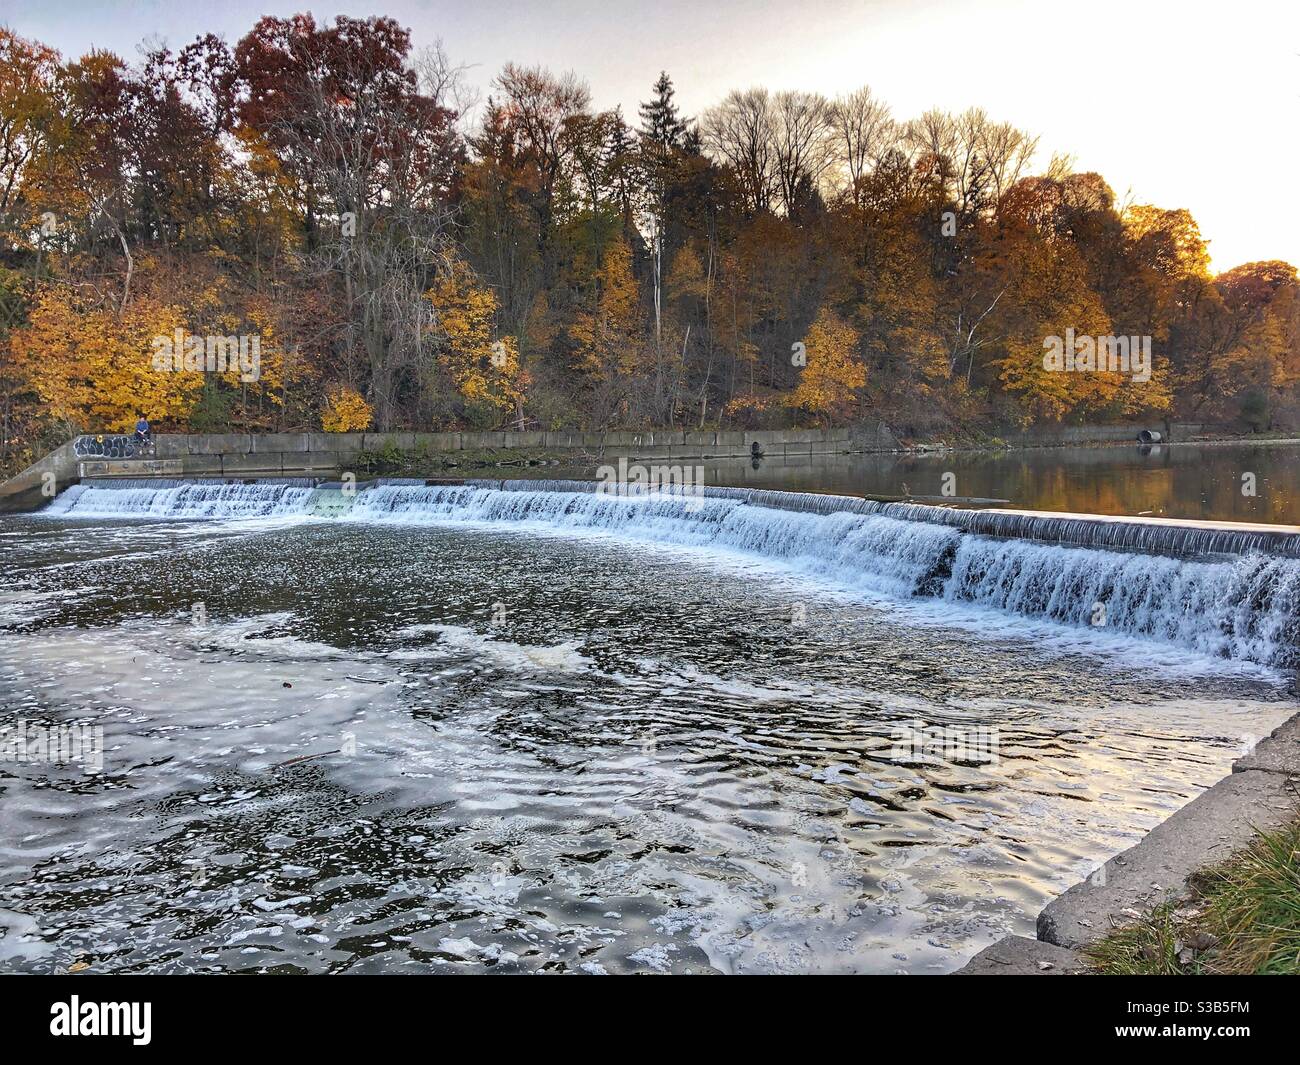 The Humber River in Toronto, Canada on a fall day. Stock Photo